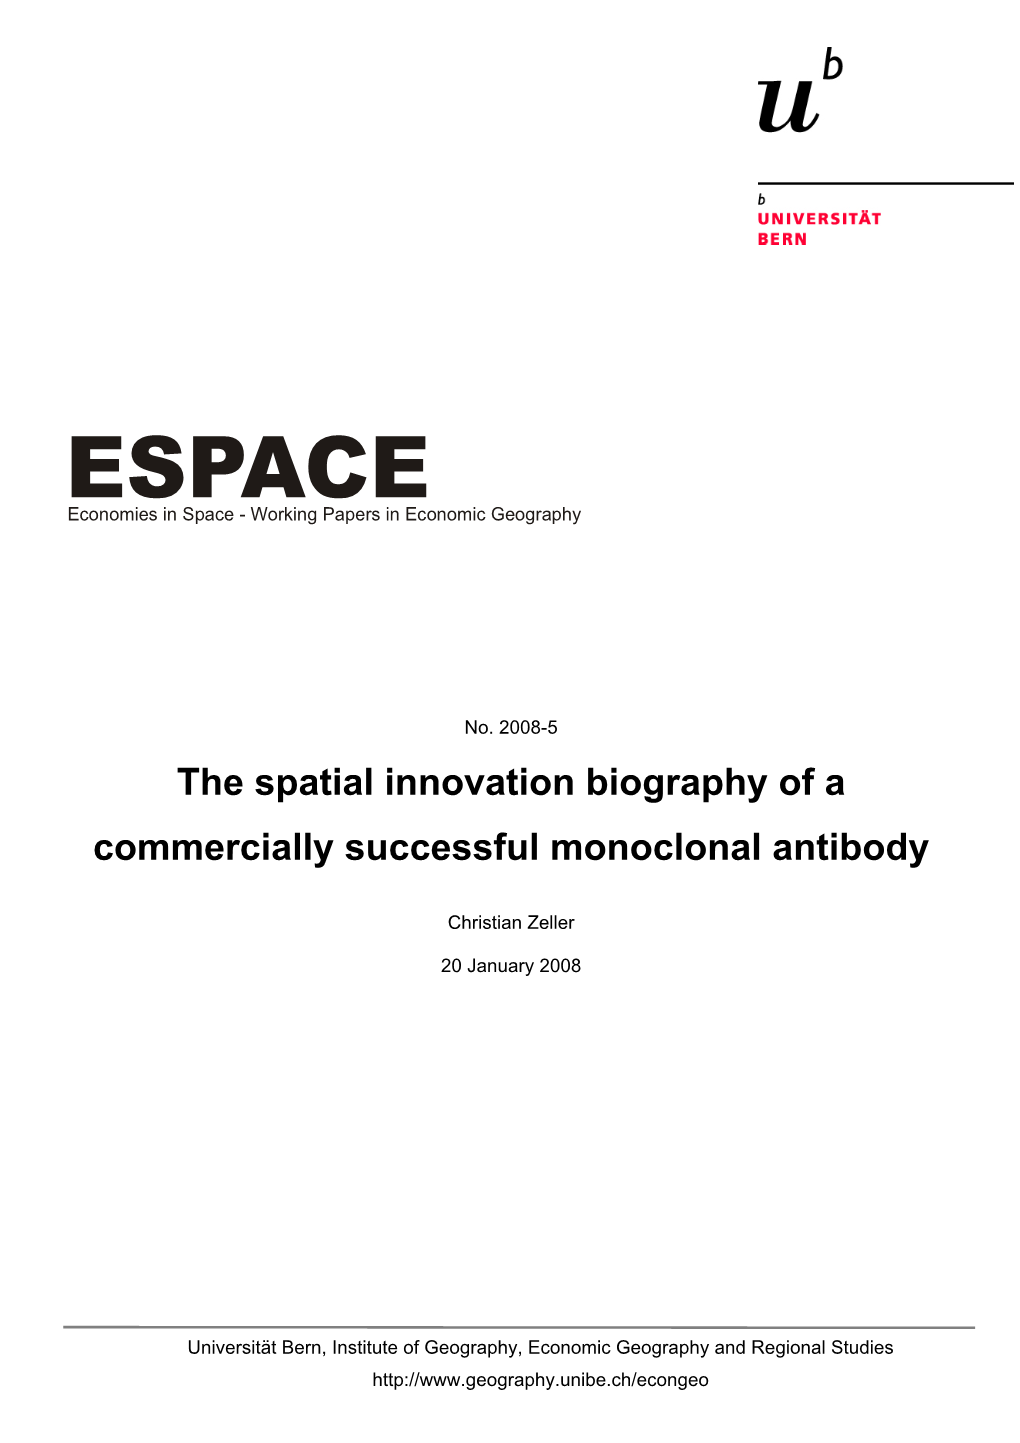 ESPACE Economies in Space - Working Papers in Economic Geography